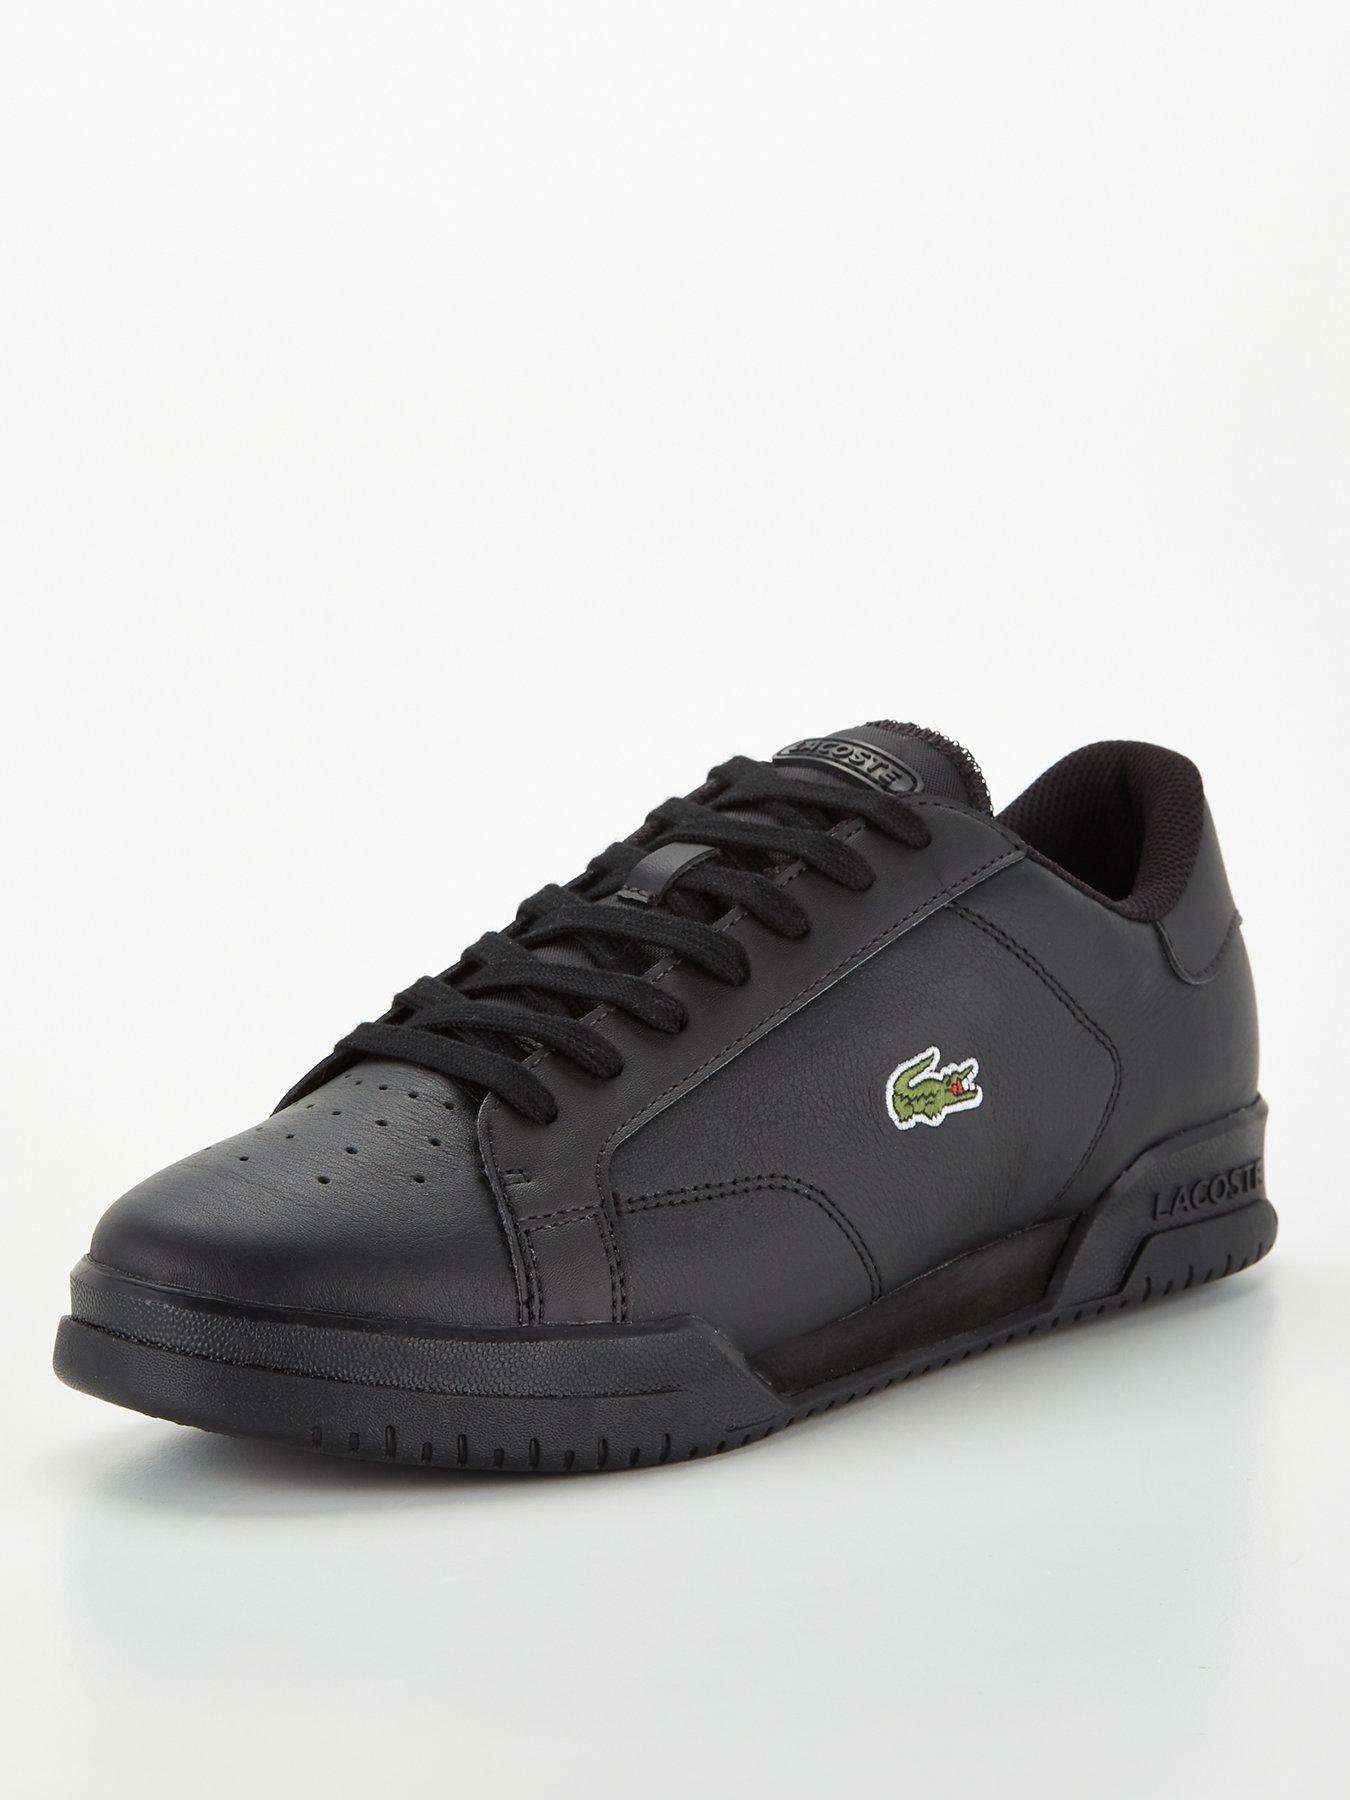 Underholde Perfervid Afvigelse Lacoste Twin Serve Leather Trainers - Black | Very Ireland